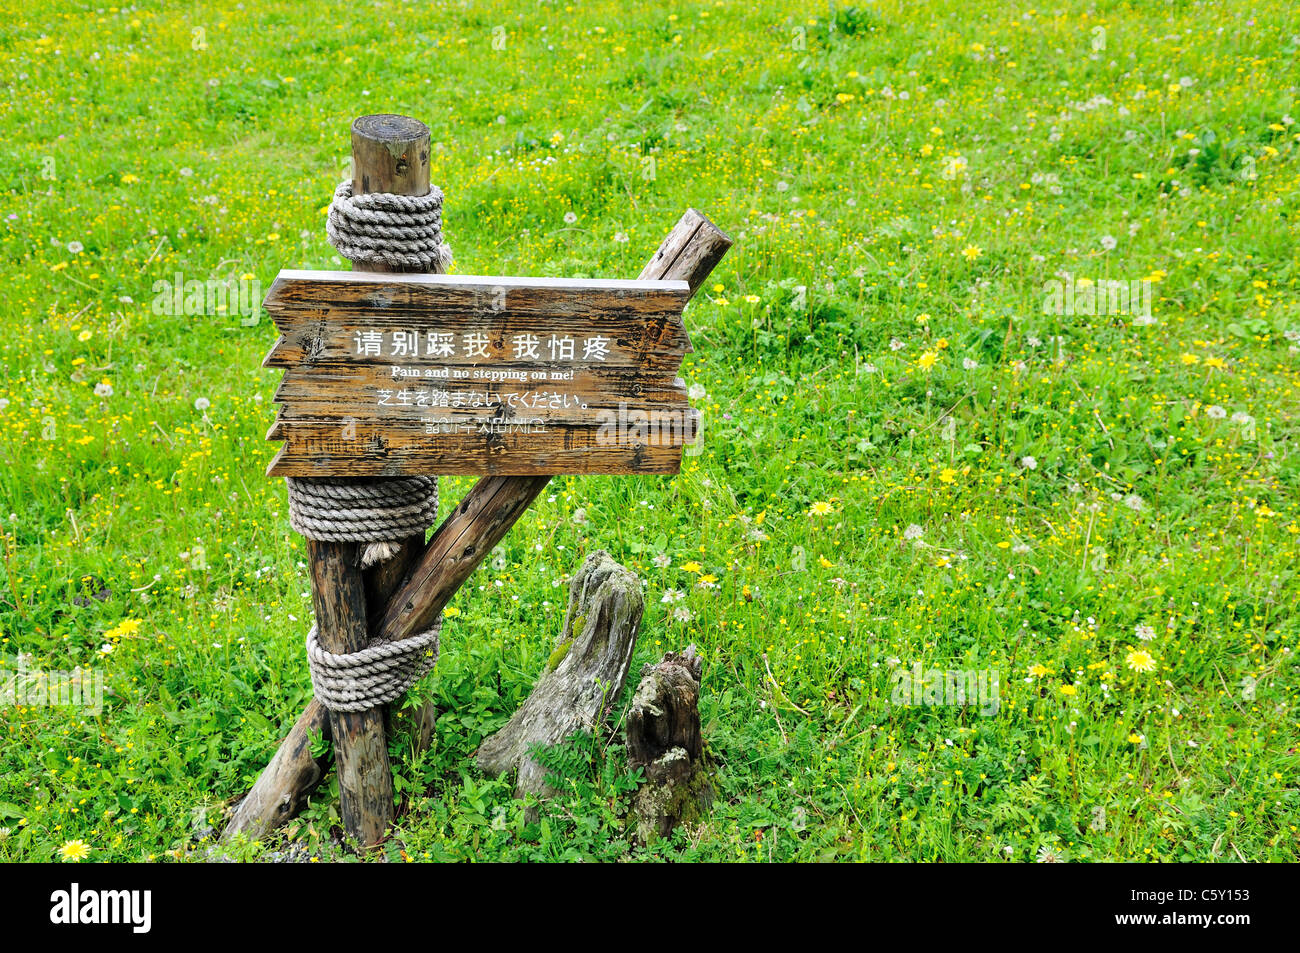 Multi-lingual sign reminds tourists not to step on the grass. Siguniang Shan Nature Reserve, Sichuan, China. Stock Photo